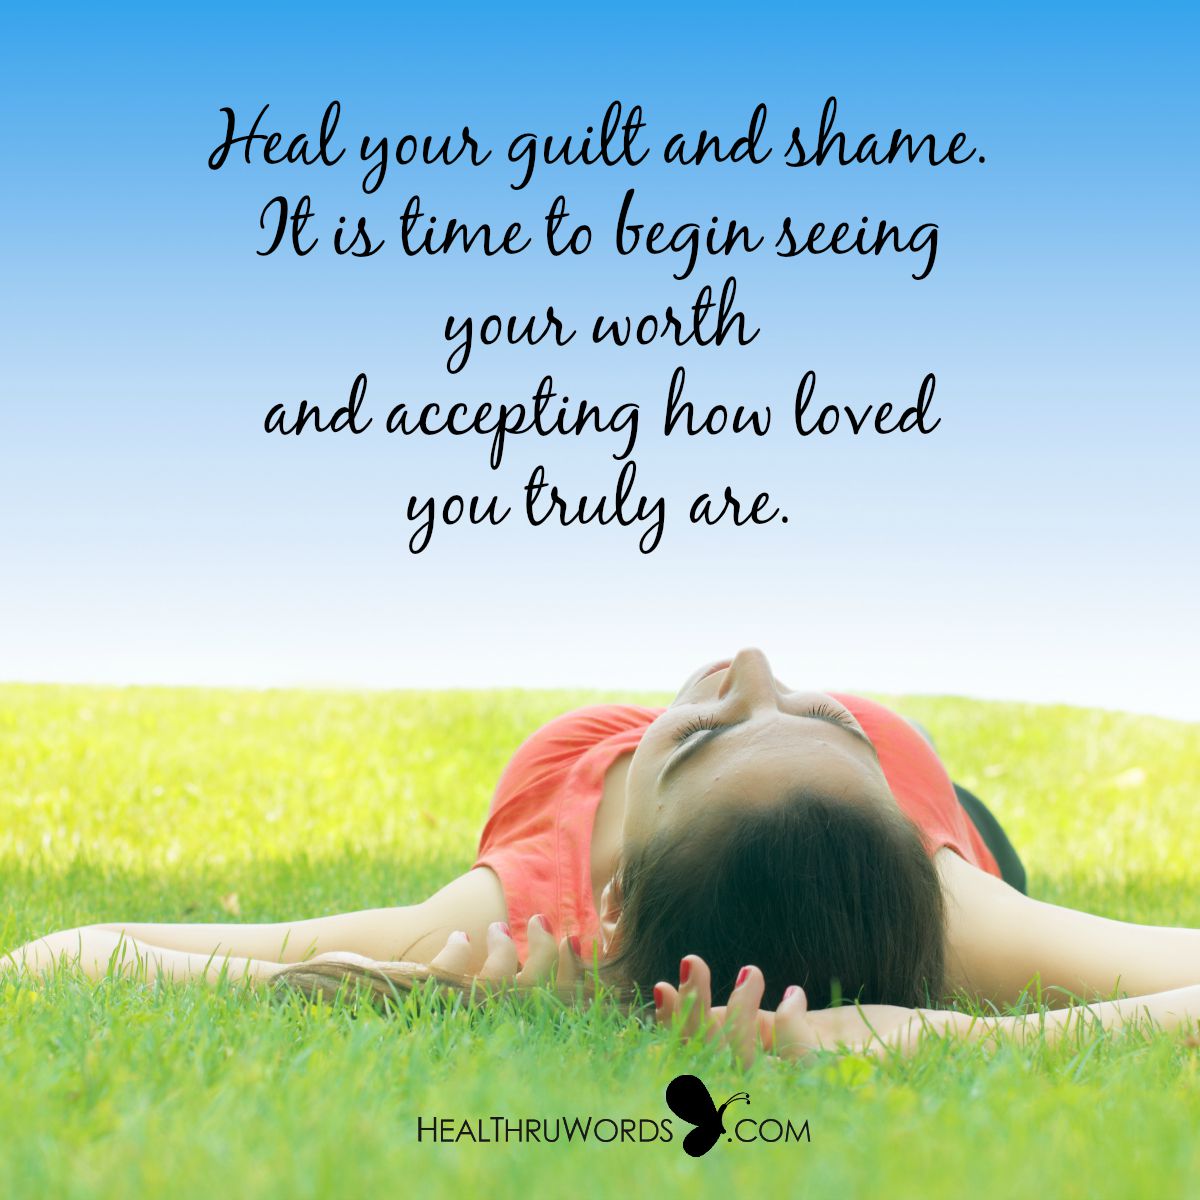 Heal your guilt and shame. It is time to begin seeing your worth and accepting how loved you truly are.